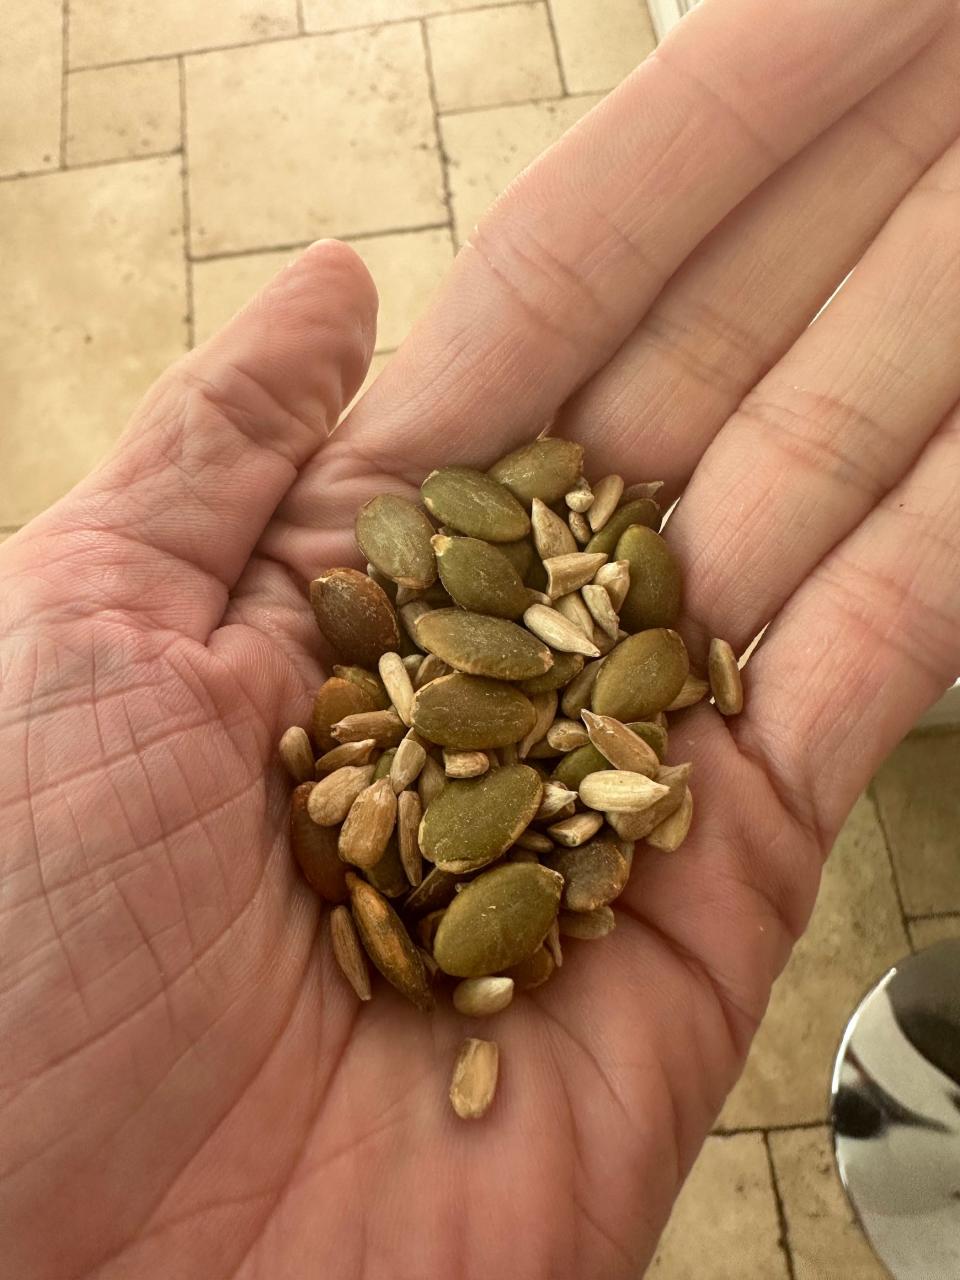 tina holding handful of seeds, including pumpkin and sunflower